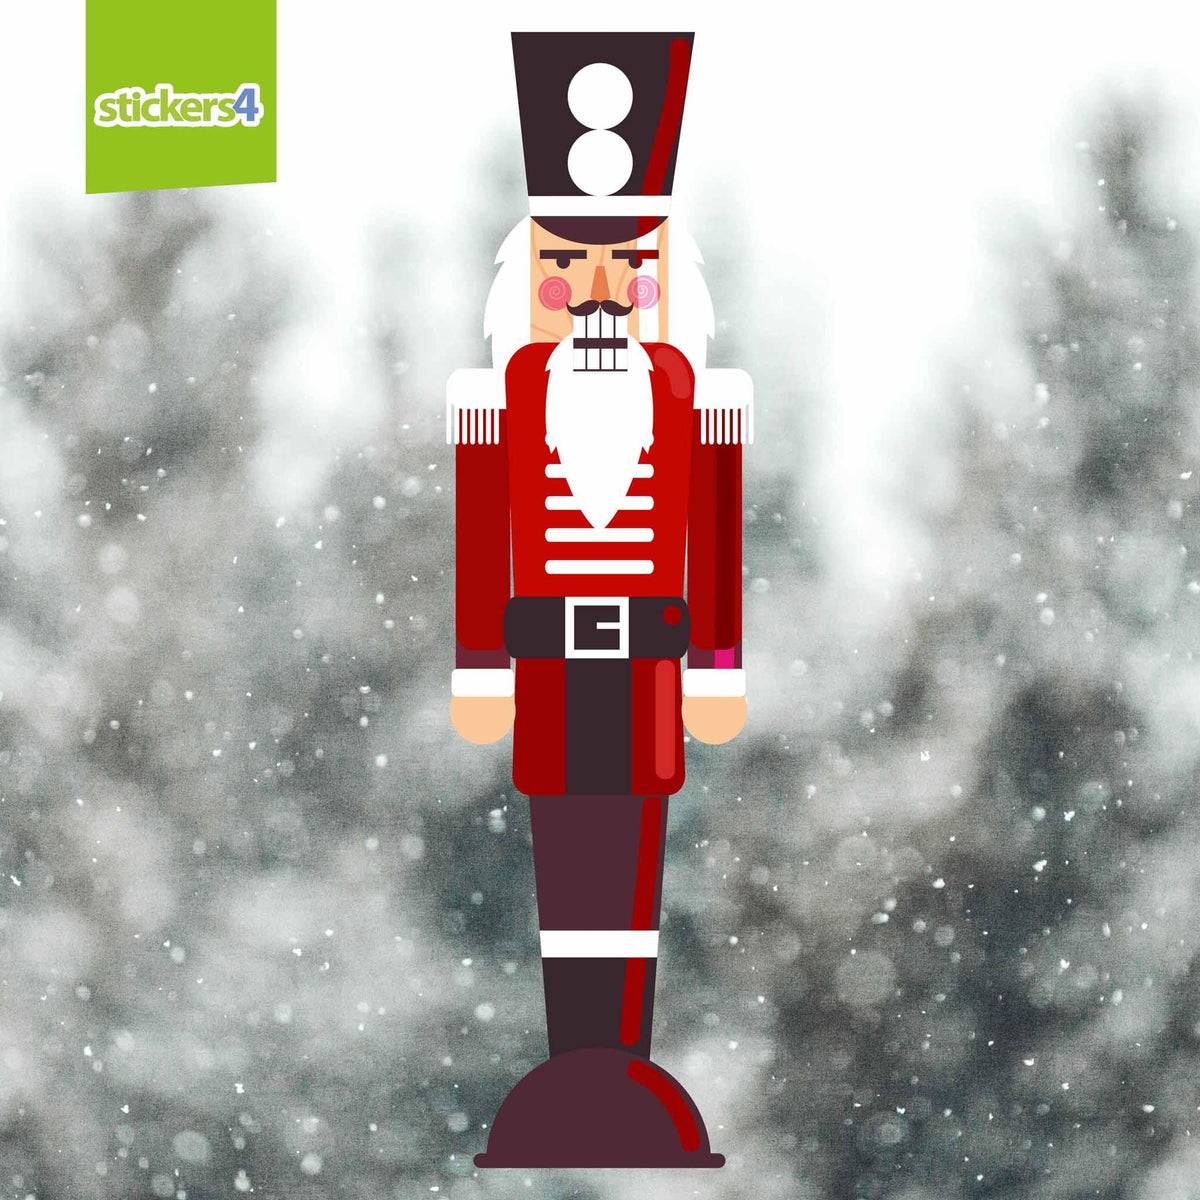 GIANT Christmas Nutcracker Soldiers Christmas Window Stickers Christmas Window Display